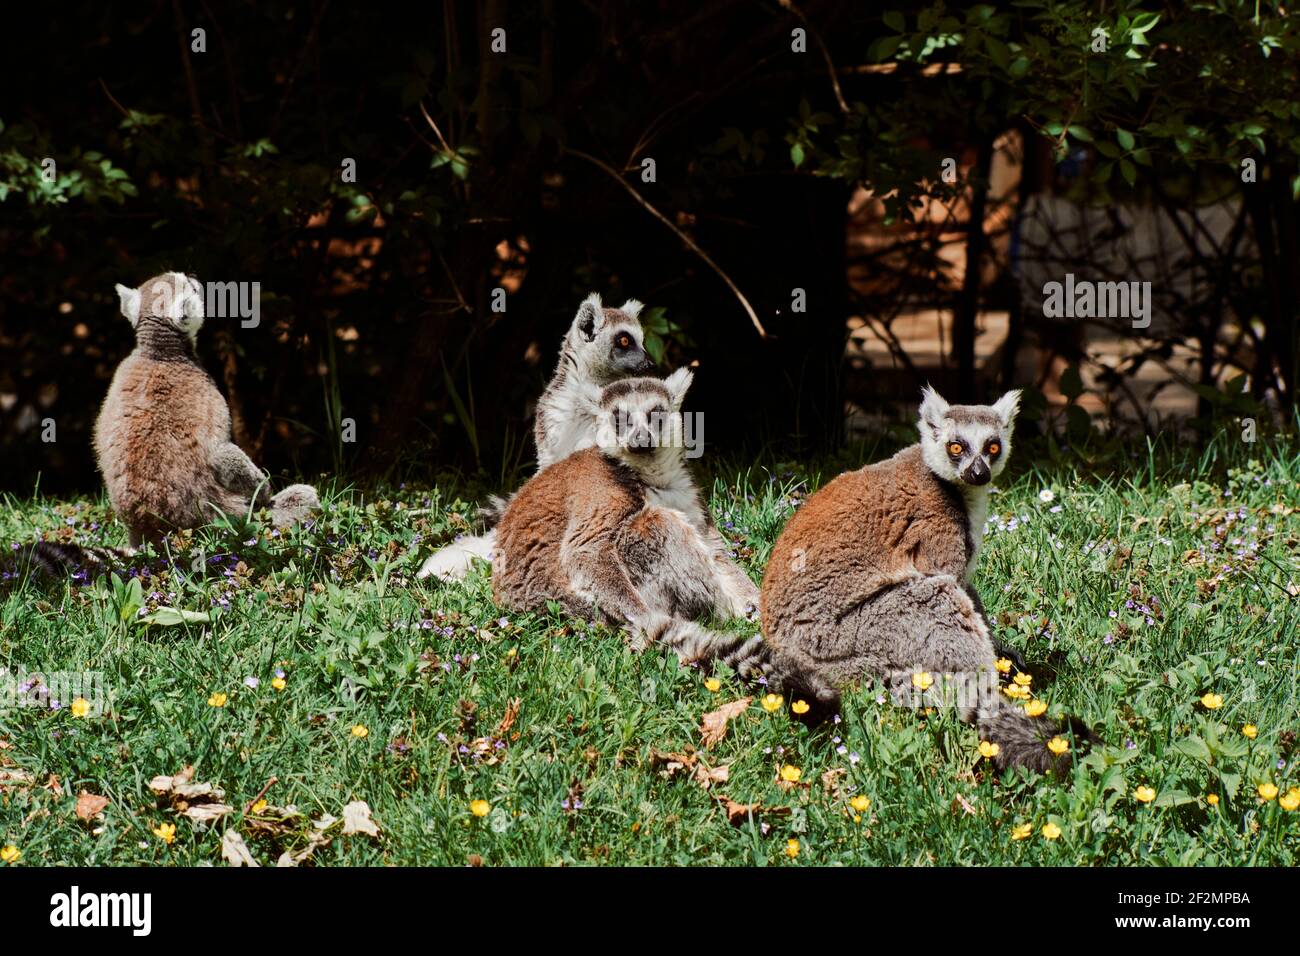 group of four Ring-tailed lemurs, Lemur catta, sitting on grassland between flowers, Stock Photo